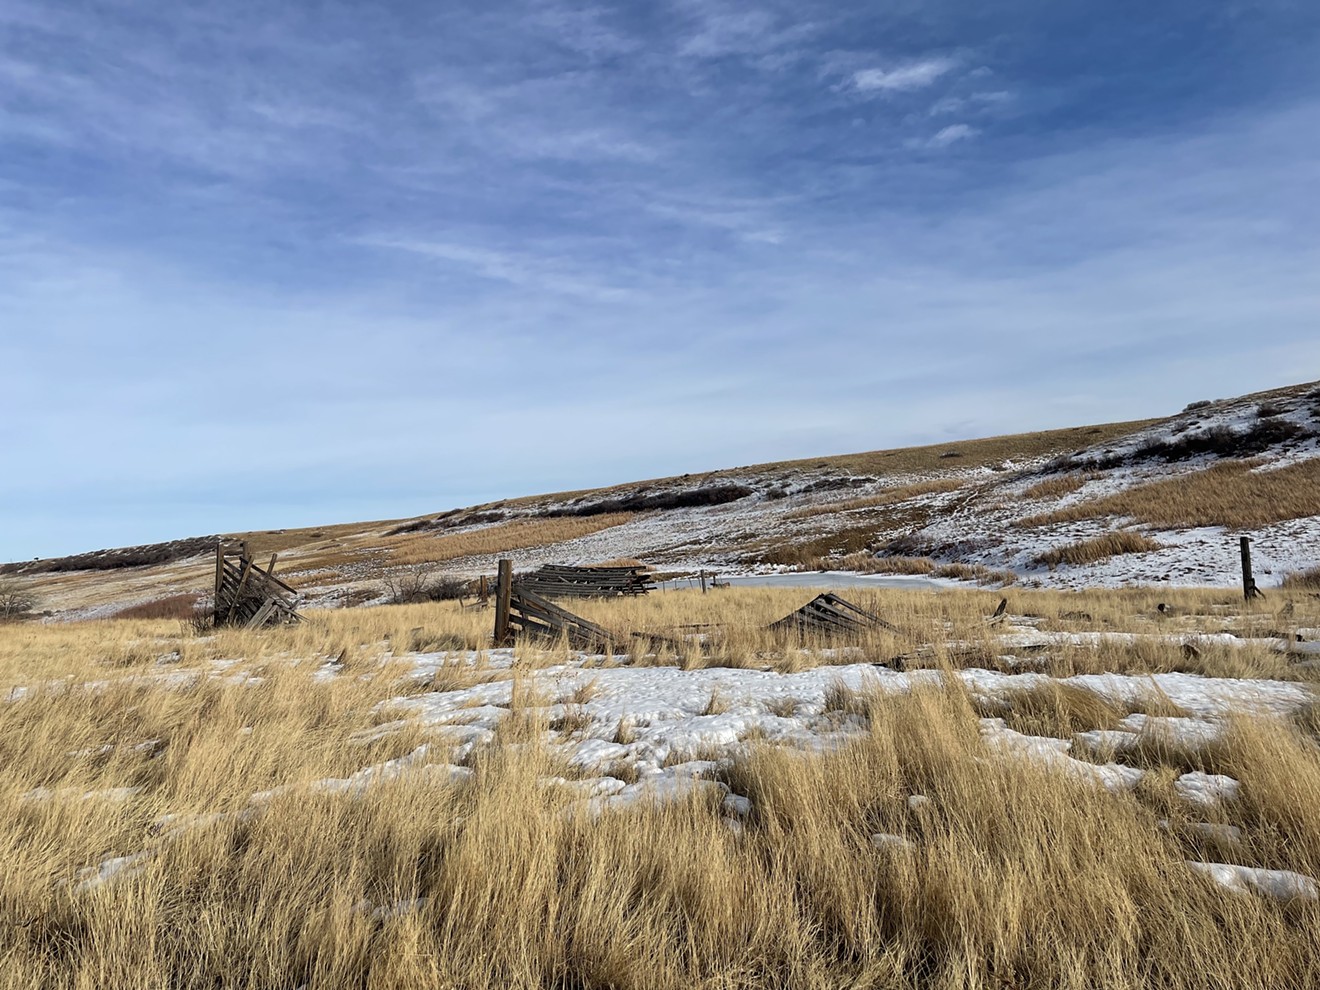 The former Rocky Flats Nuclear Plant is now a wildlife refuge.